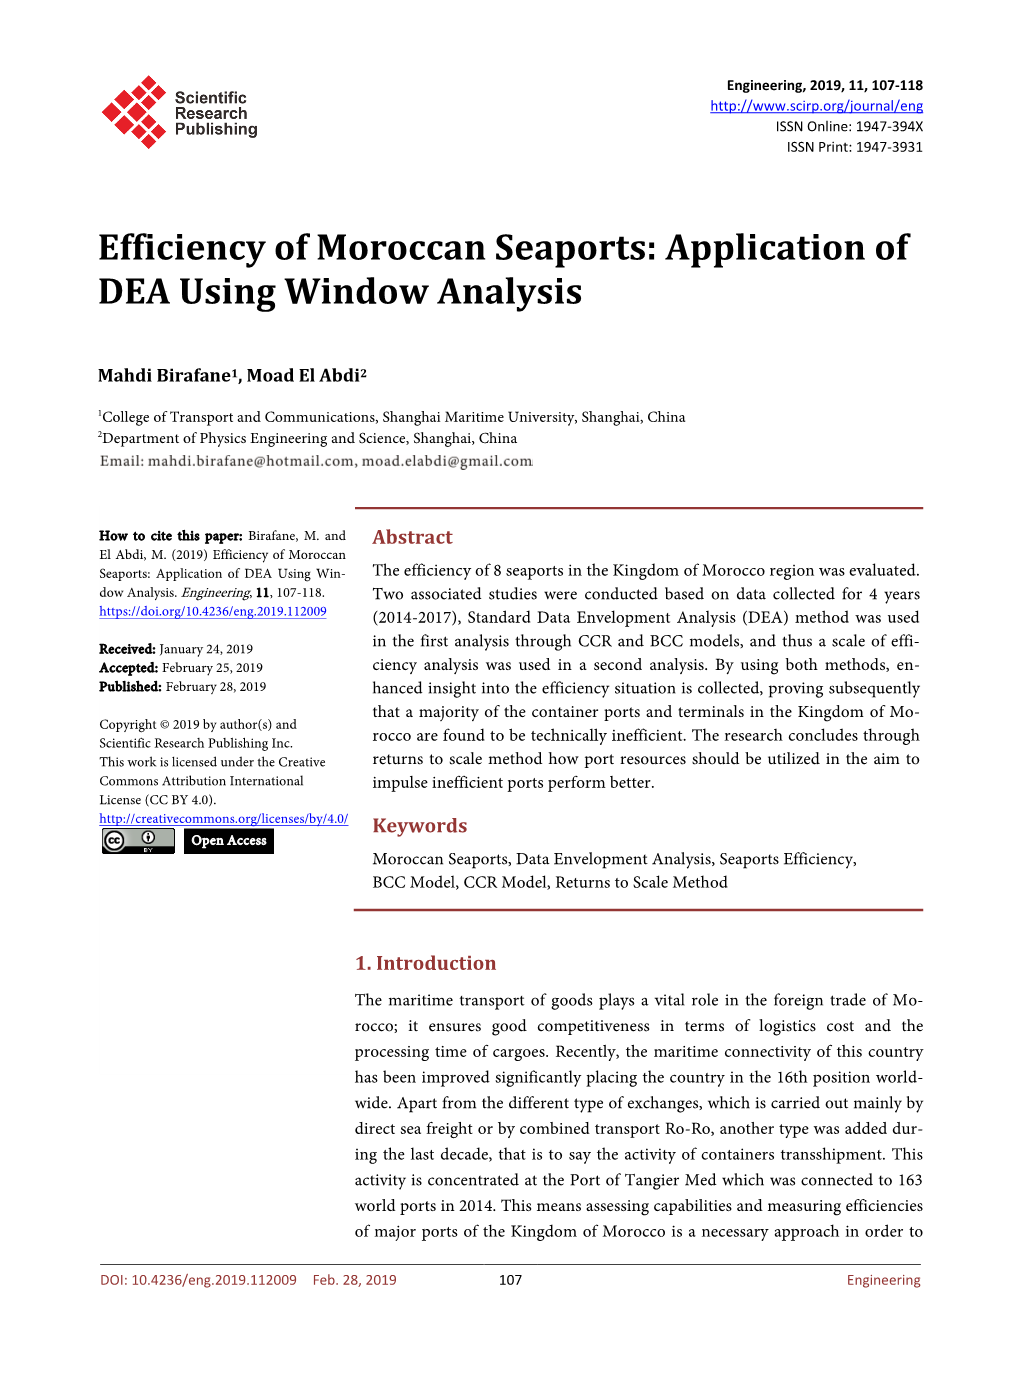 Efficiency of Moroccan Seaports: Application of DEA Using Window Analysis